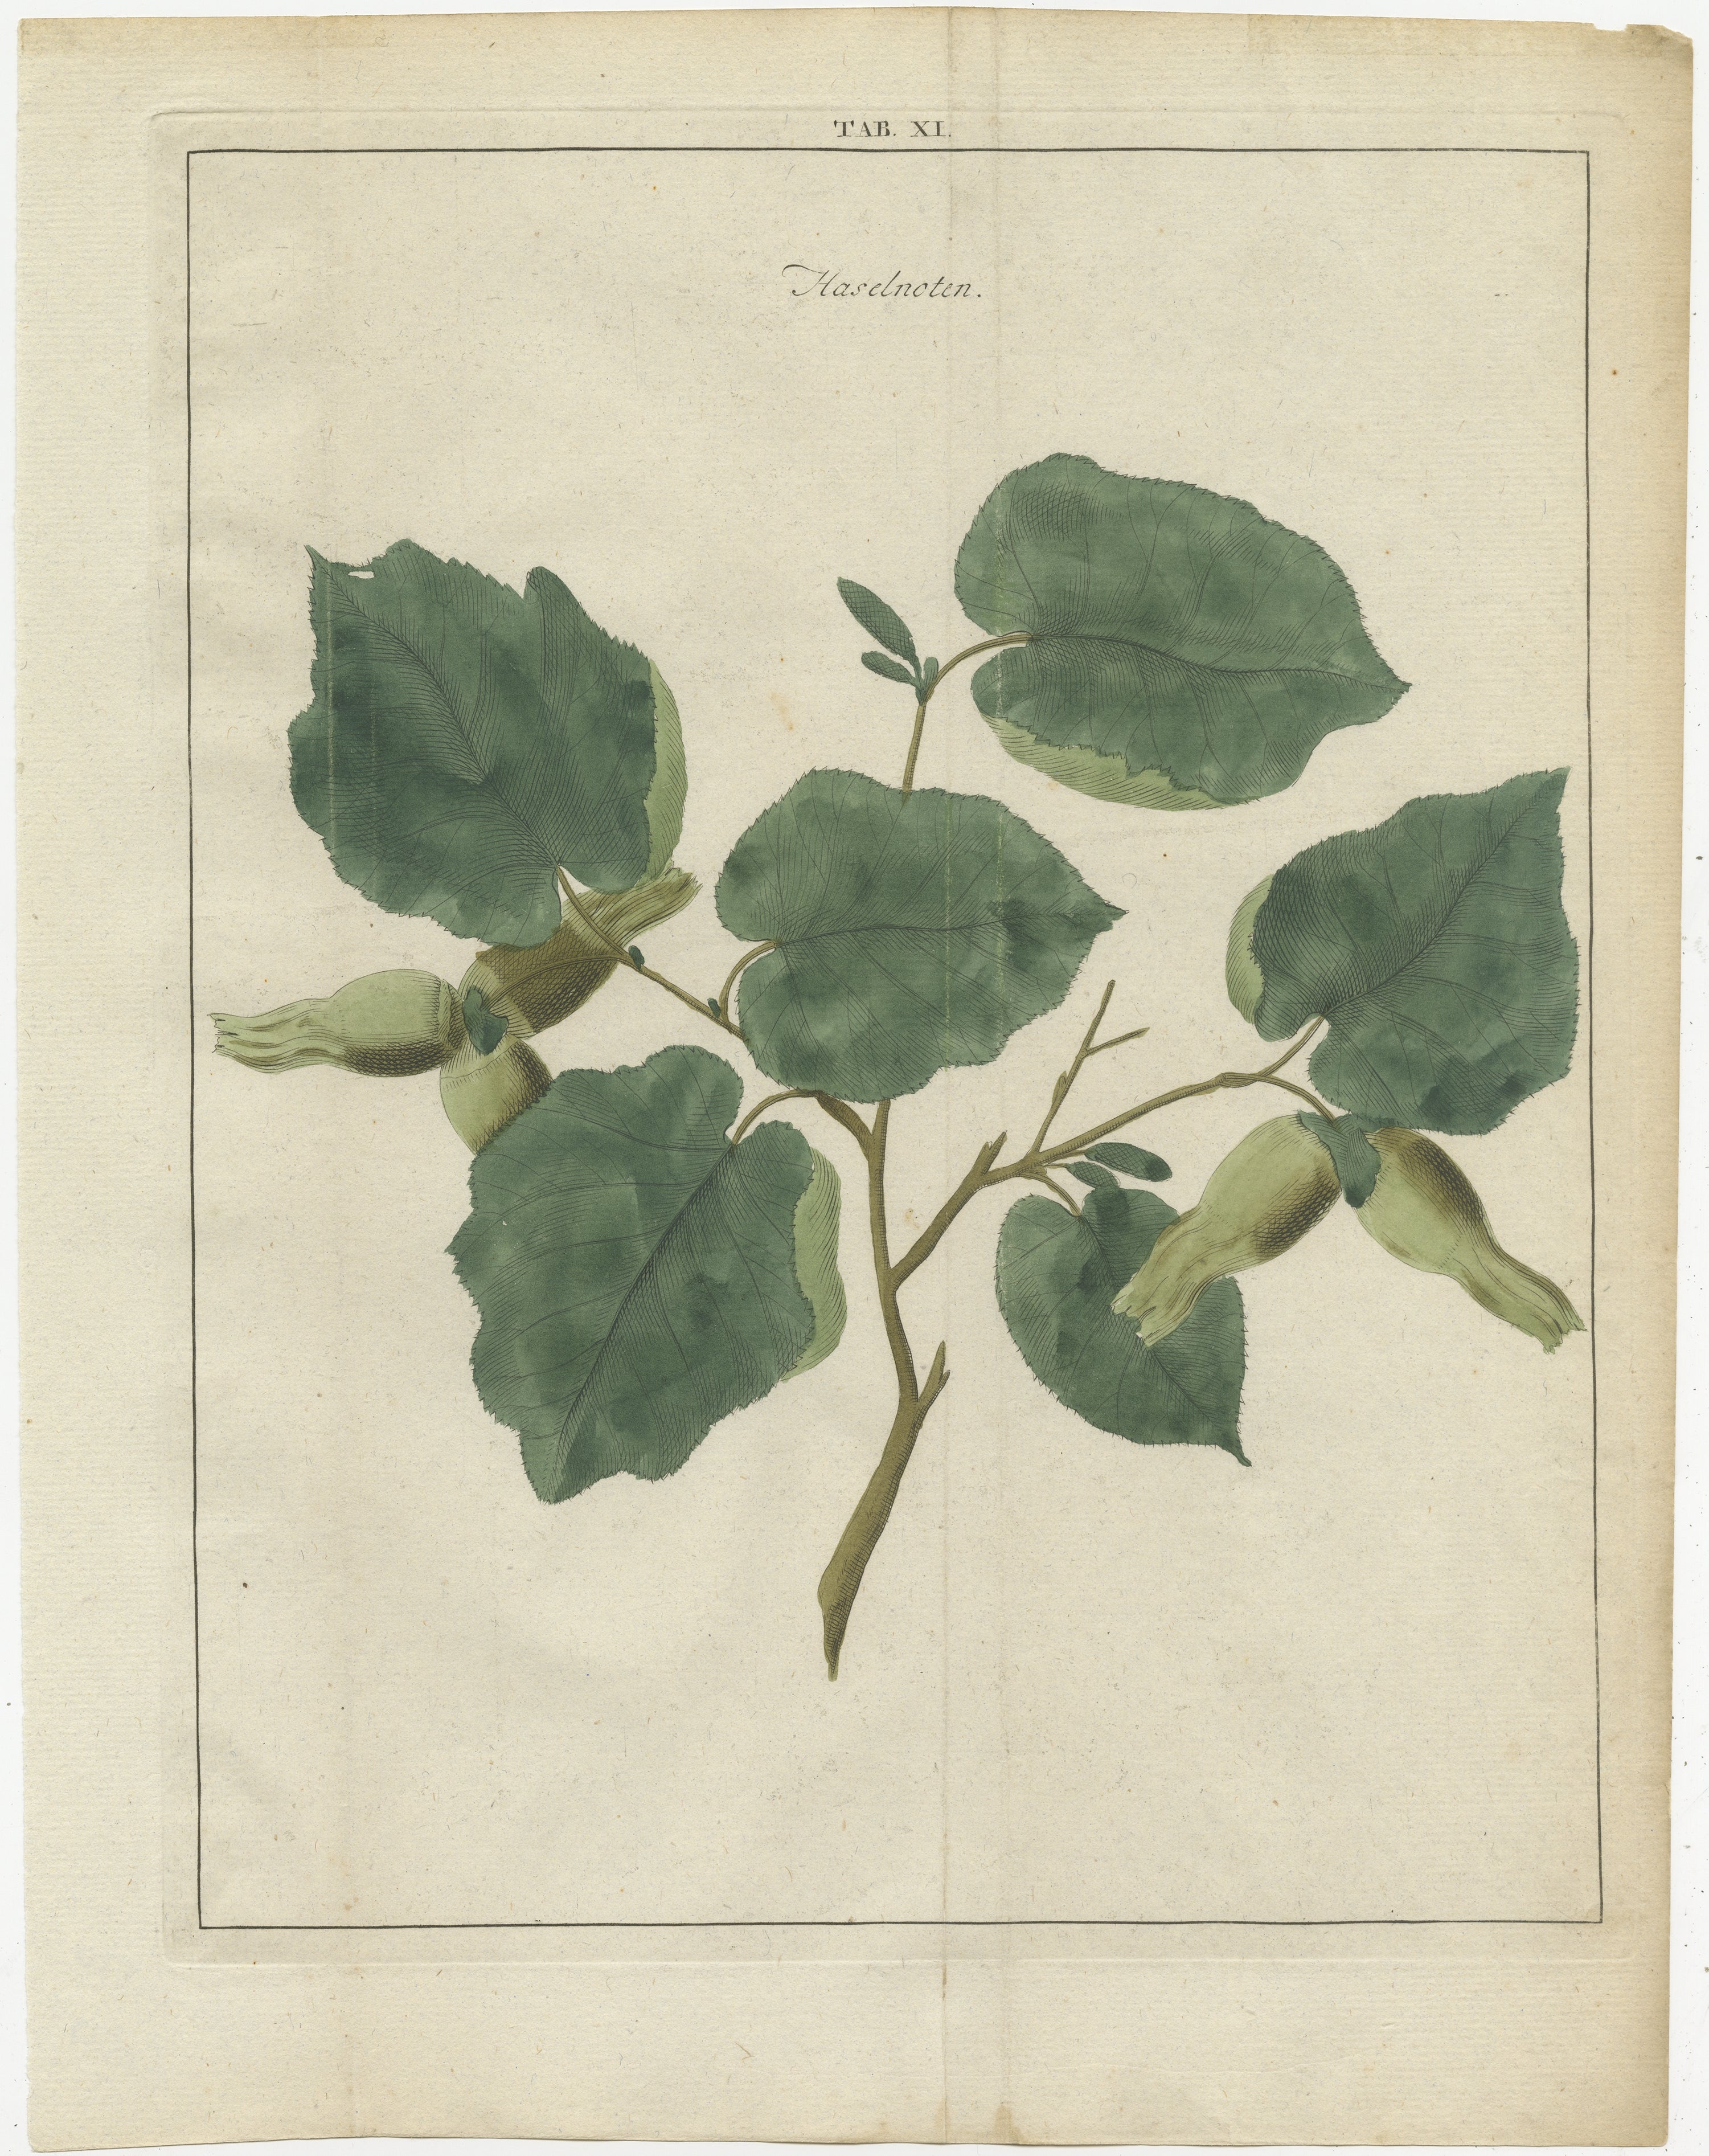 Antique print of the common hazel. Originates from 'Pomologia' by J. H. Knoop.

Artists and Engravers: Published by Johann Hermann Knoop (c.1700-1769).

Condition: Good, general age-related toning. Minor wear, blank verso. Please study image